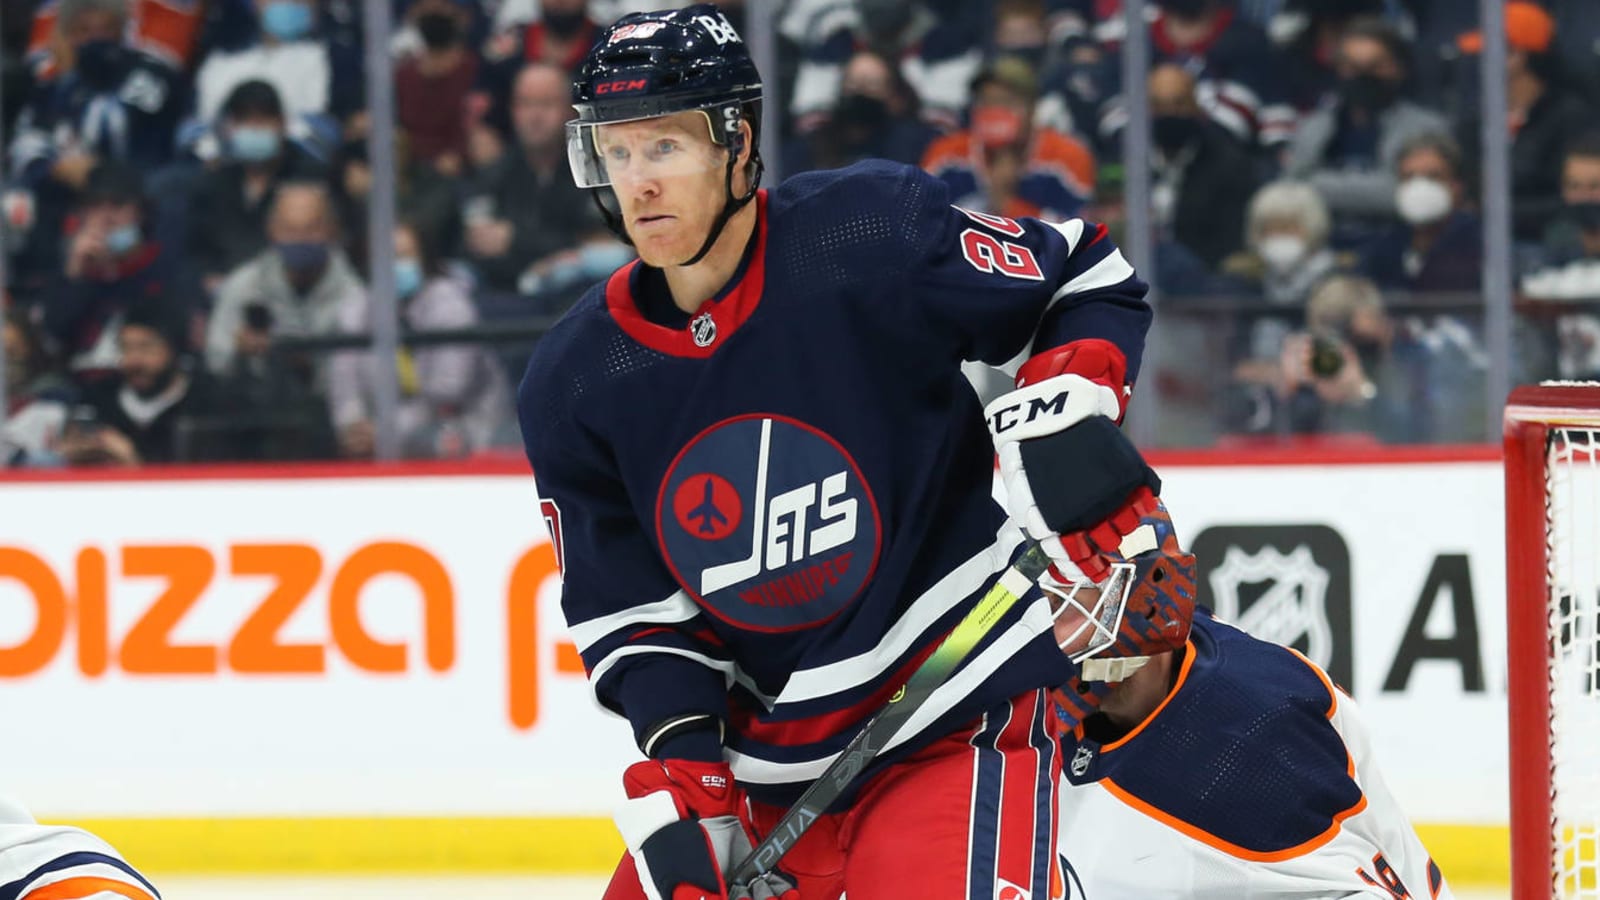 Jets' Nash, Panthers' Connauton placed on waivers